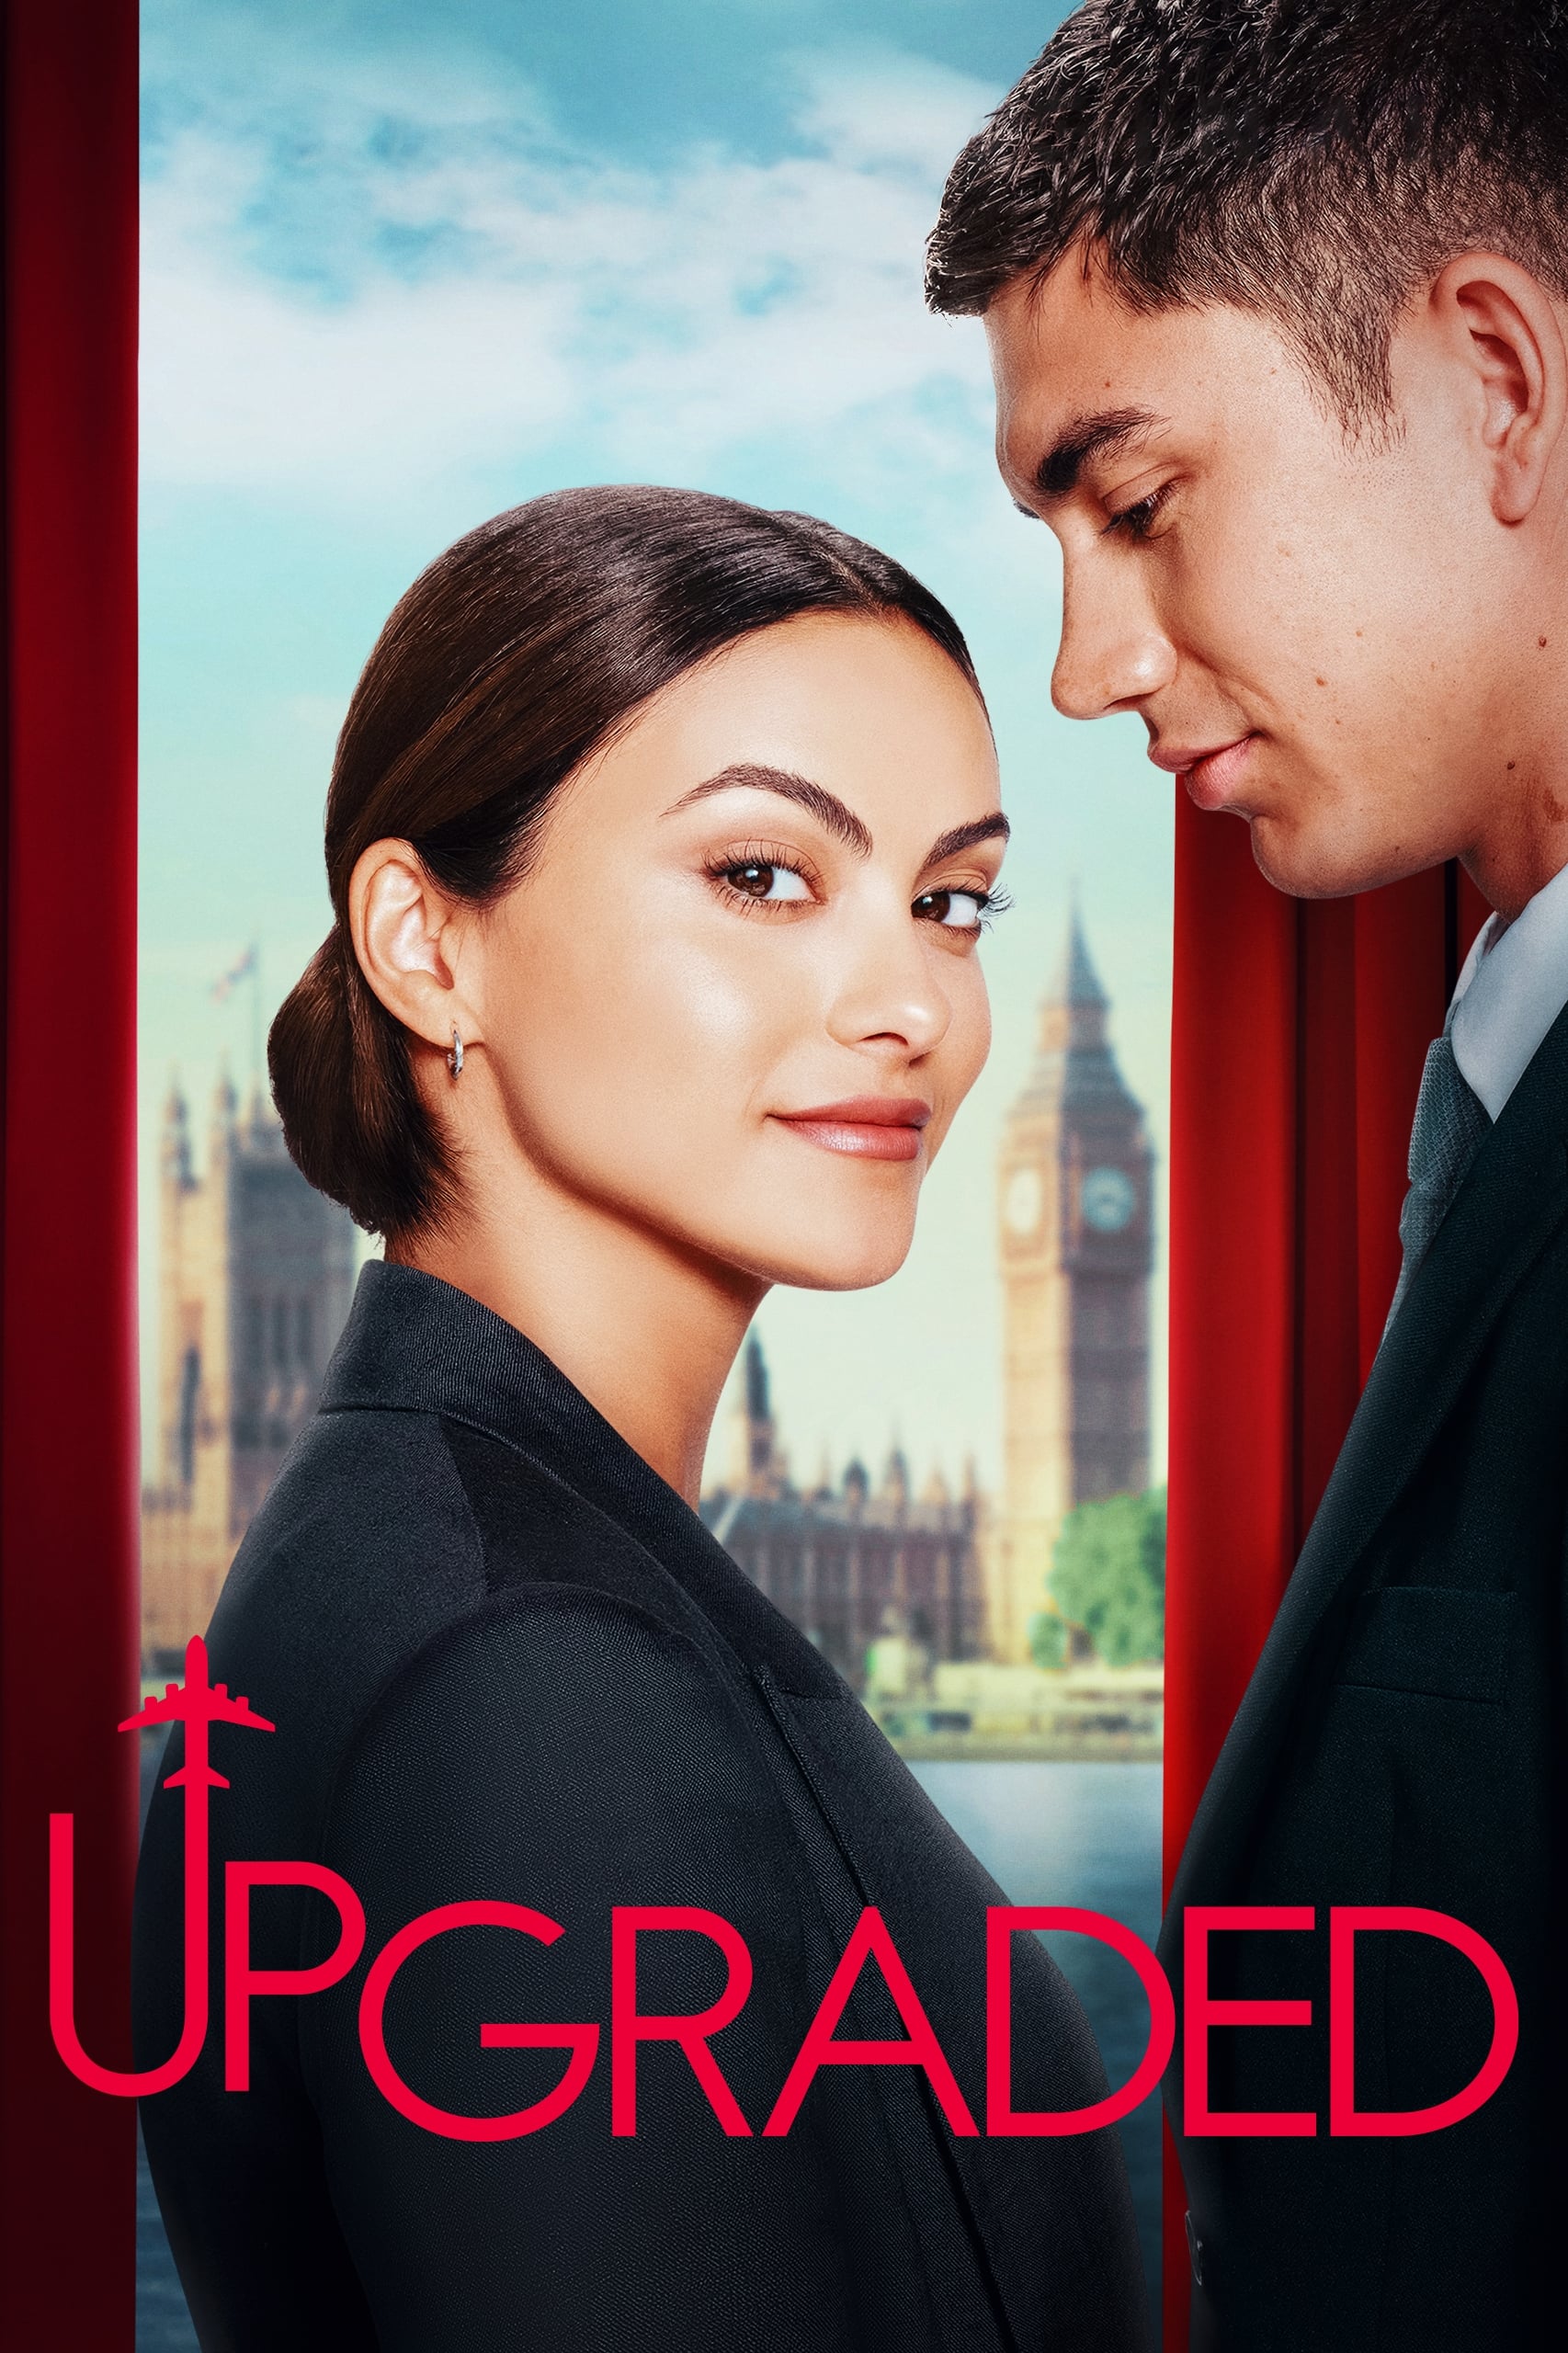 Image for movie Upgraded